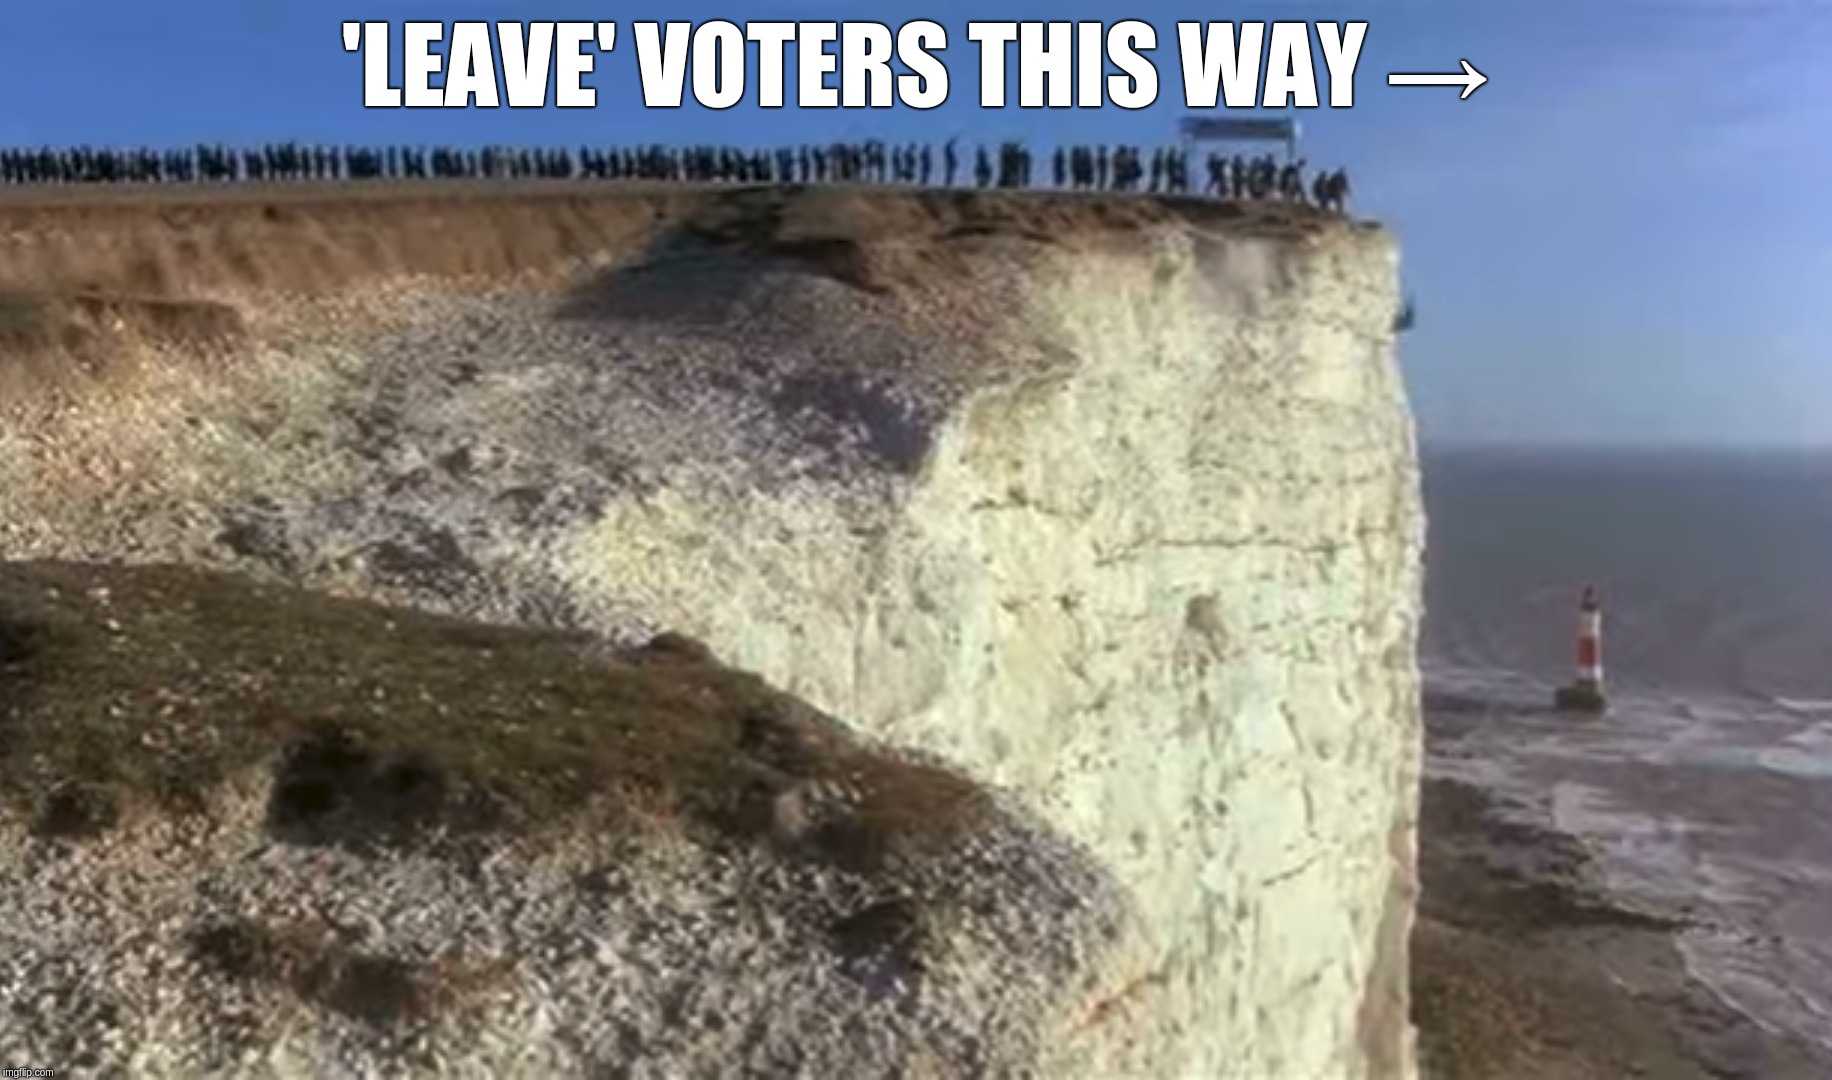 'Britain's Road To Recovery If No Final EU Decision Made Regarding Brexit.' | 'LEAVE' VOTERS THIS WAY → | image tagged in britain,brexit,leave,vote,referendum,eu | made w/ Imgflip meme maker